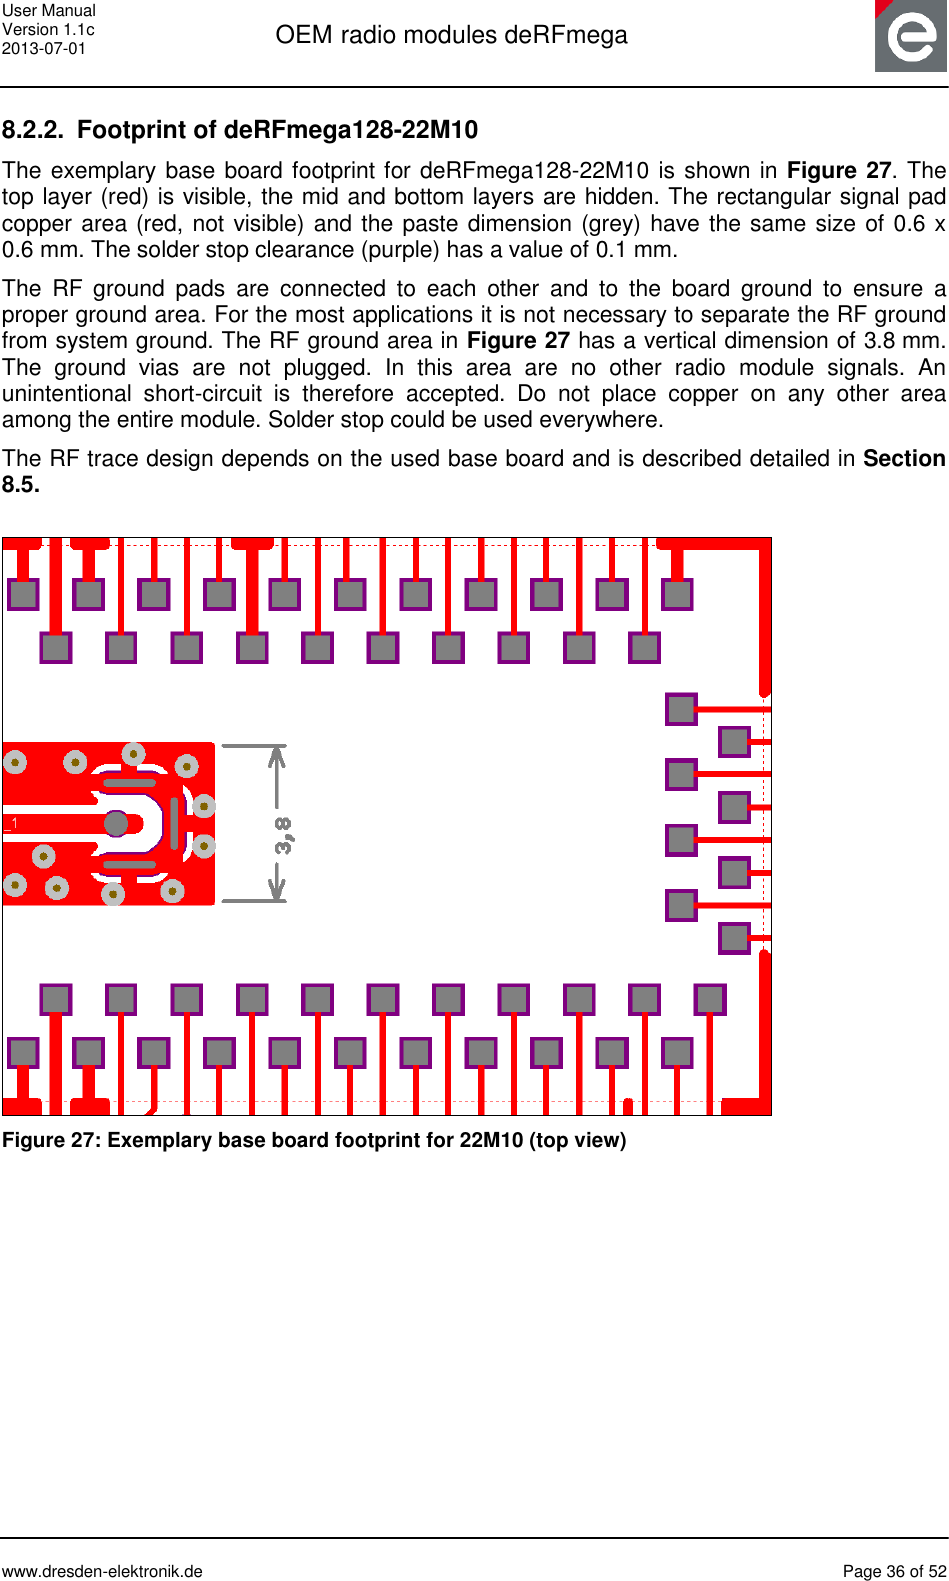 User Manual Version 1.1c 2013-07-01  OEM radio modules deRFmega      www.dresden-elektronik.de  Page 36 of 52  8.2.2.  Footprint of deRFmega128-22M10 The exemplary base board footprint for deRFmega128-22M10 is shown in Figure 27. The top layer (red) is visible, the mid and bottom layers are hidden. The rectangular signal pad copper area (red, not visible) and the paste dimension (grey) have the same size of 0.6 x 0.6 mm. The solder stop clearance (purple) has a value of 0.1 mm.  The  RF  ground  pads  are  connected  to  each  other  and  to  the  board  ground  to  ensure  a proper ground area. For the most applications it is not necessary to separate the RF ground from system ground. The RF ground area in Figure 27 has a vertical dimension of 3.8 mm. The  ground  vias  are  not  plugged.  In  this  area  are  no  other  radio  module  signals.  An unintentional  short-circuit  is  therefore  accepted.  Do  not  place  copper  on  any  other  area among the entire module. Solder stop could be used everywhere. The RF trace design depends on the used base board and is described detailed in Section 8.5.   Figure 27: Exemplary base board footprint for 22M10 (top view) 